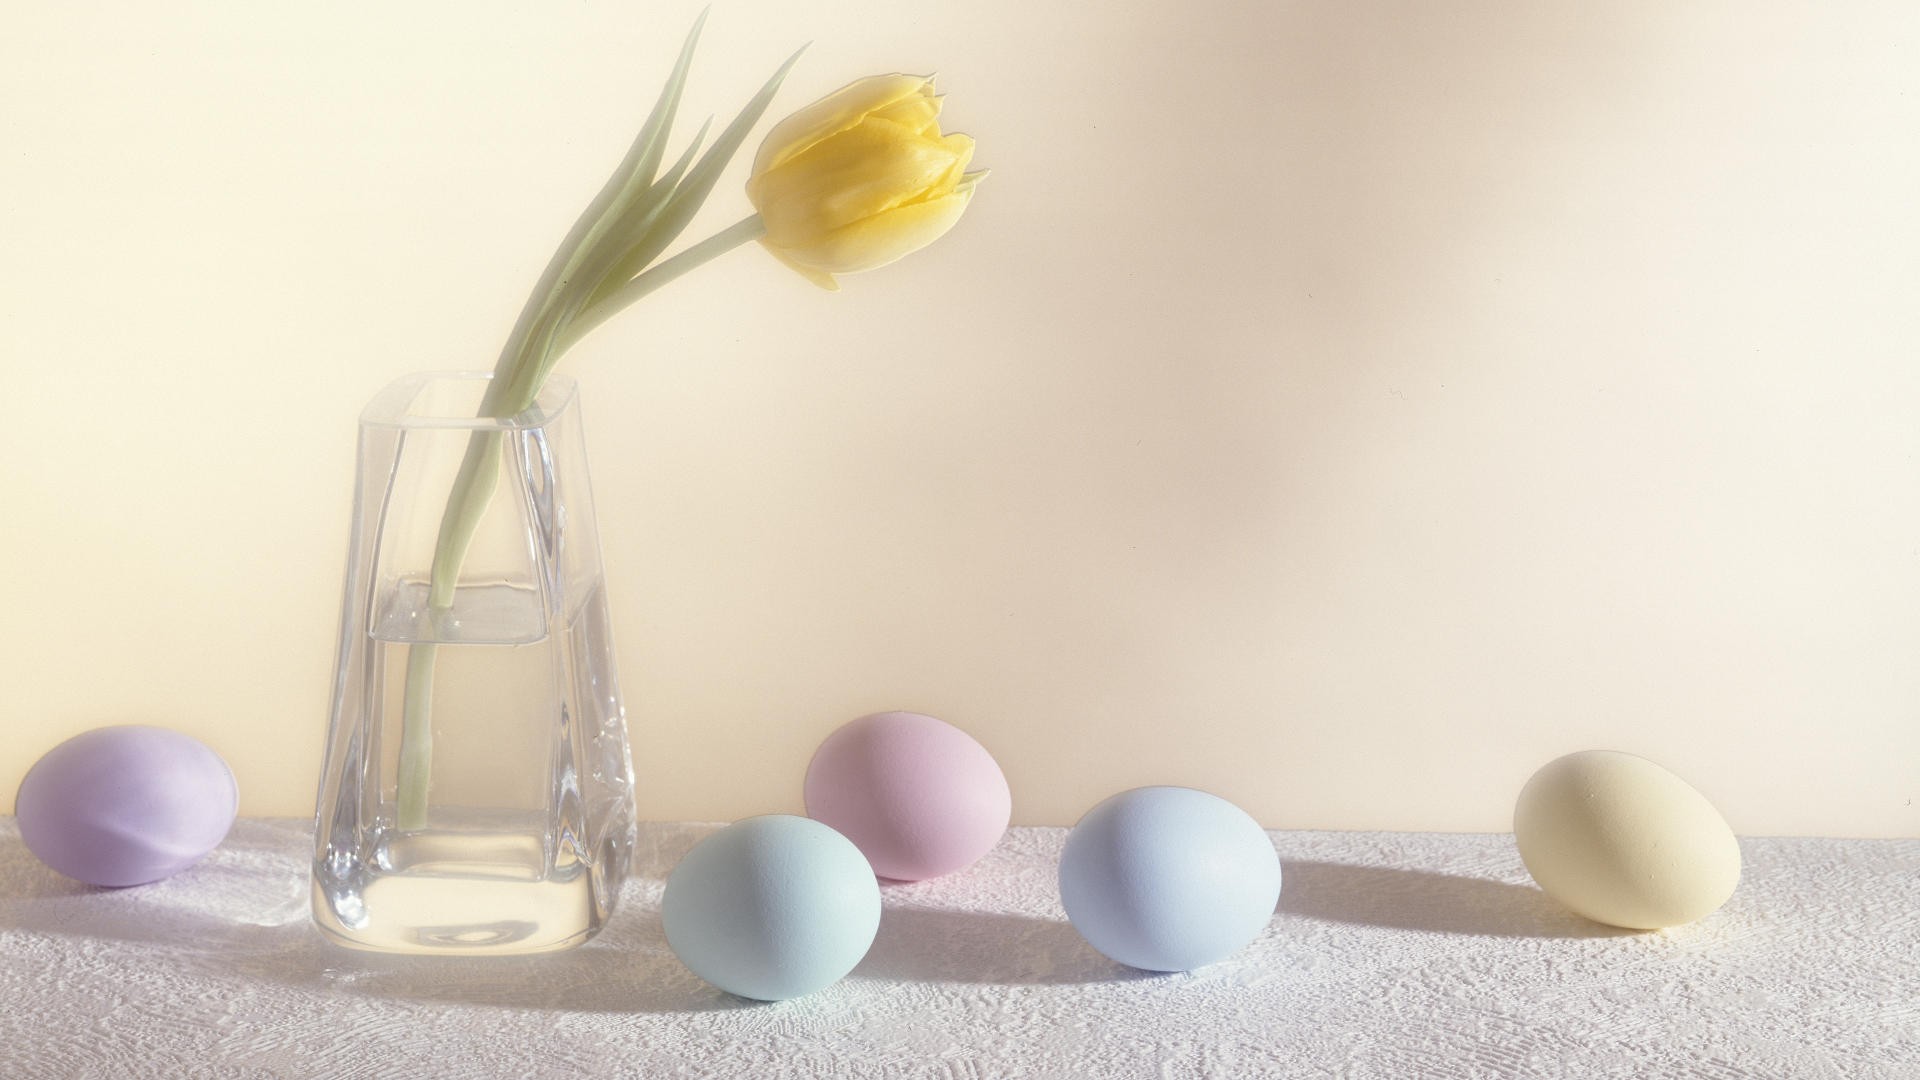  under the easter wallpapers category of free hd wallpapers free easter